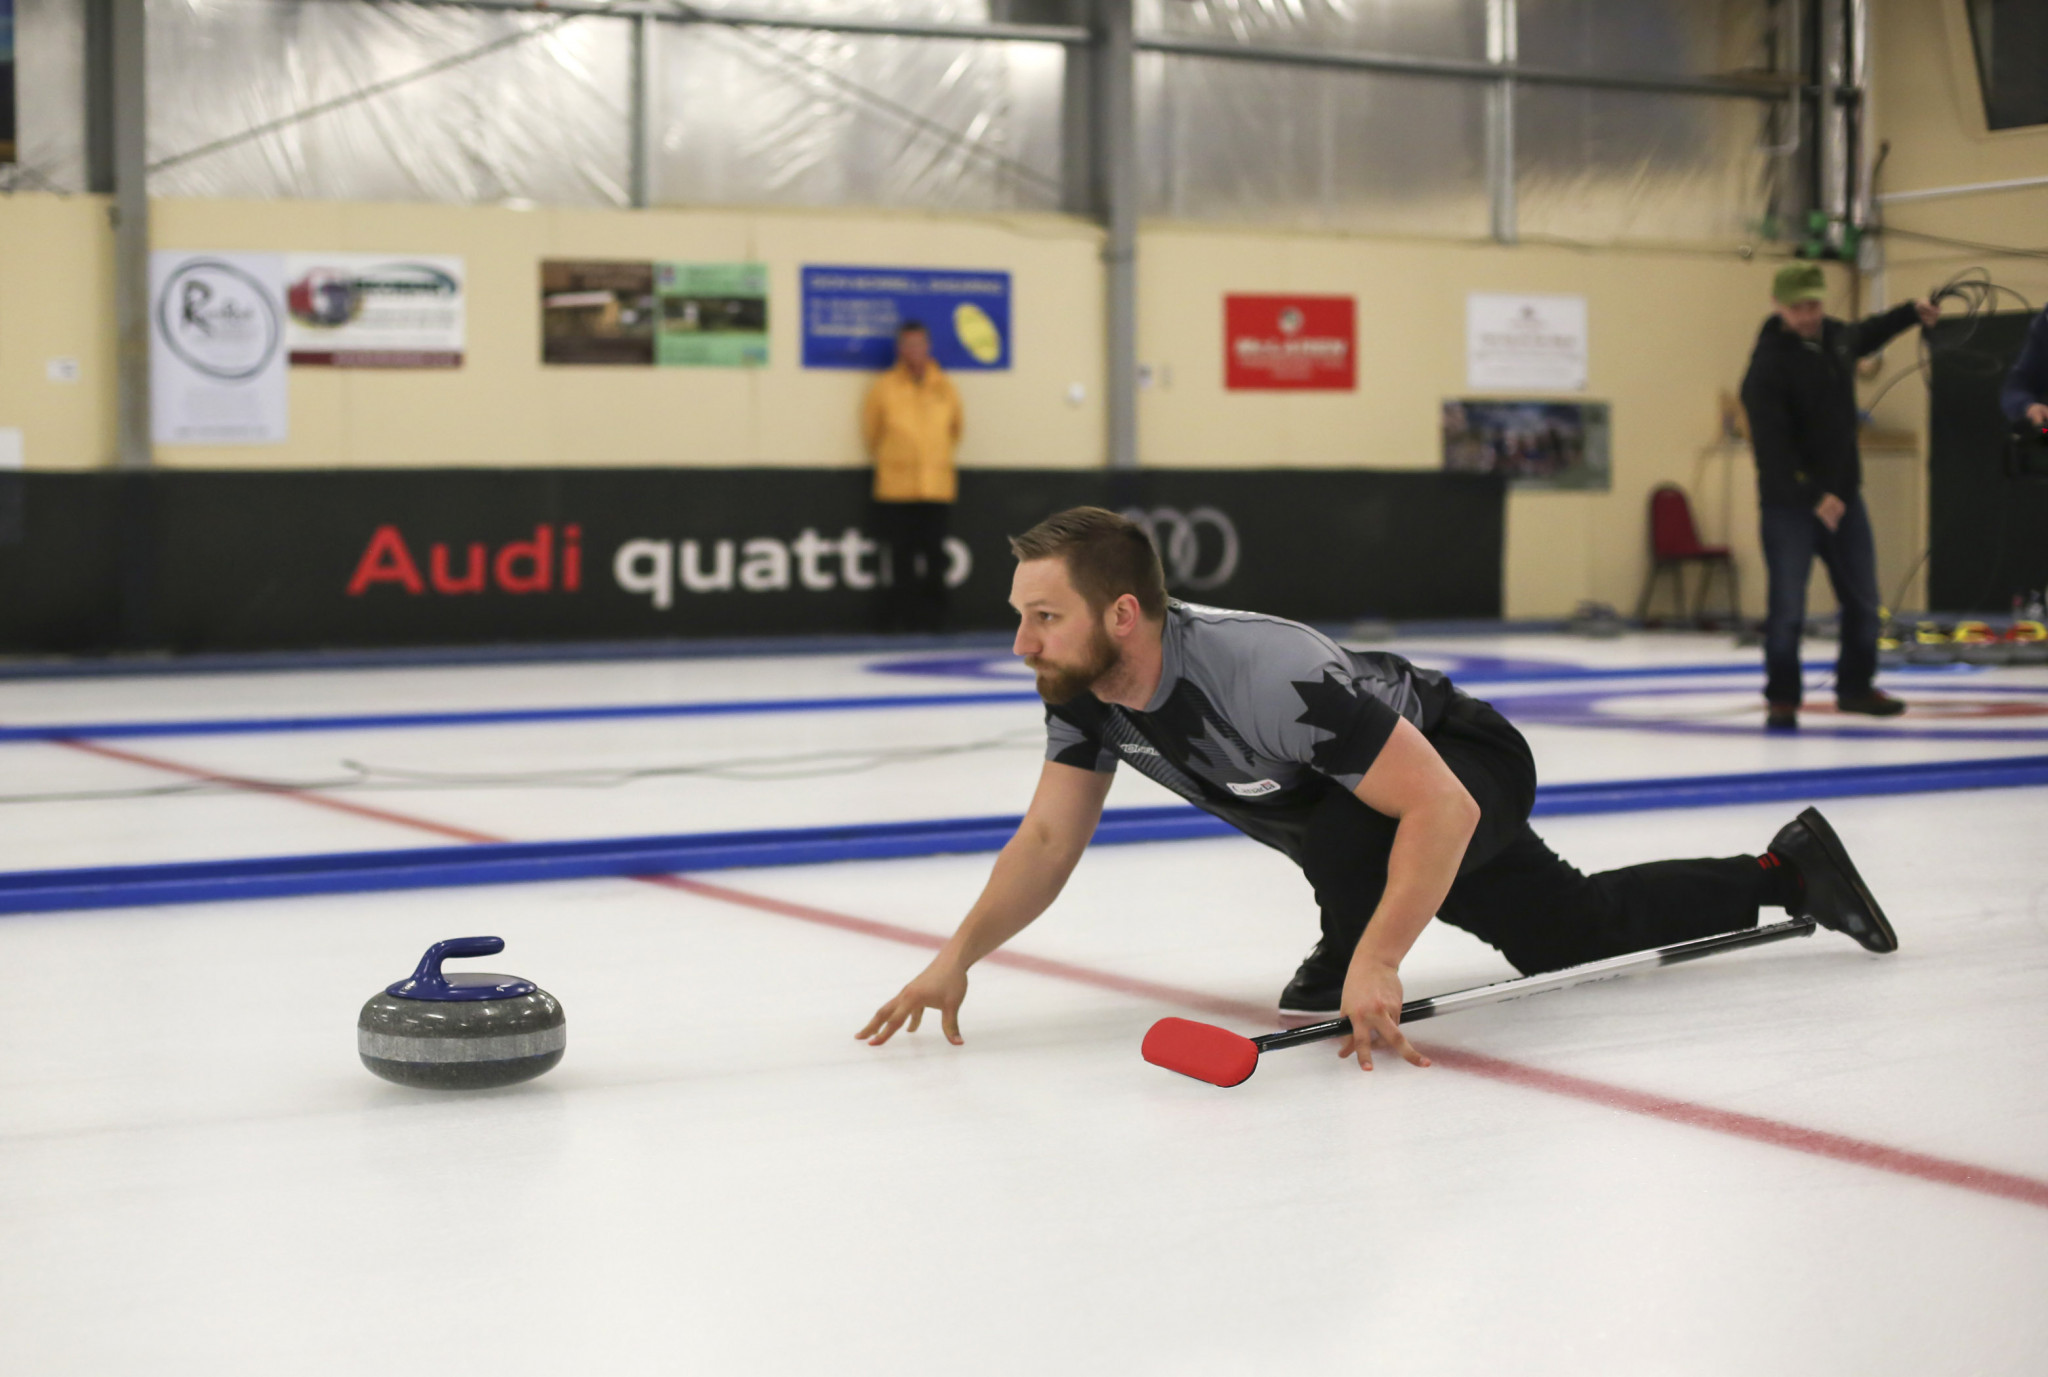 New Zealand ready to host new qualification event for 2019 World Curling Championships 